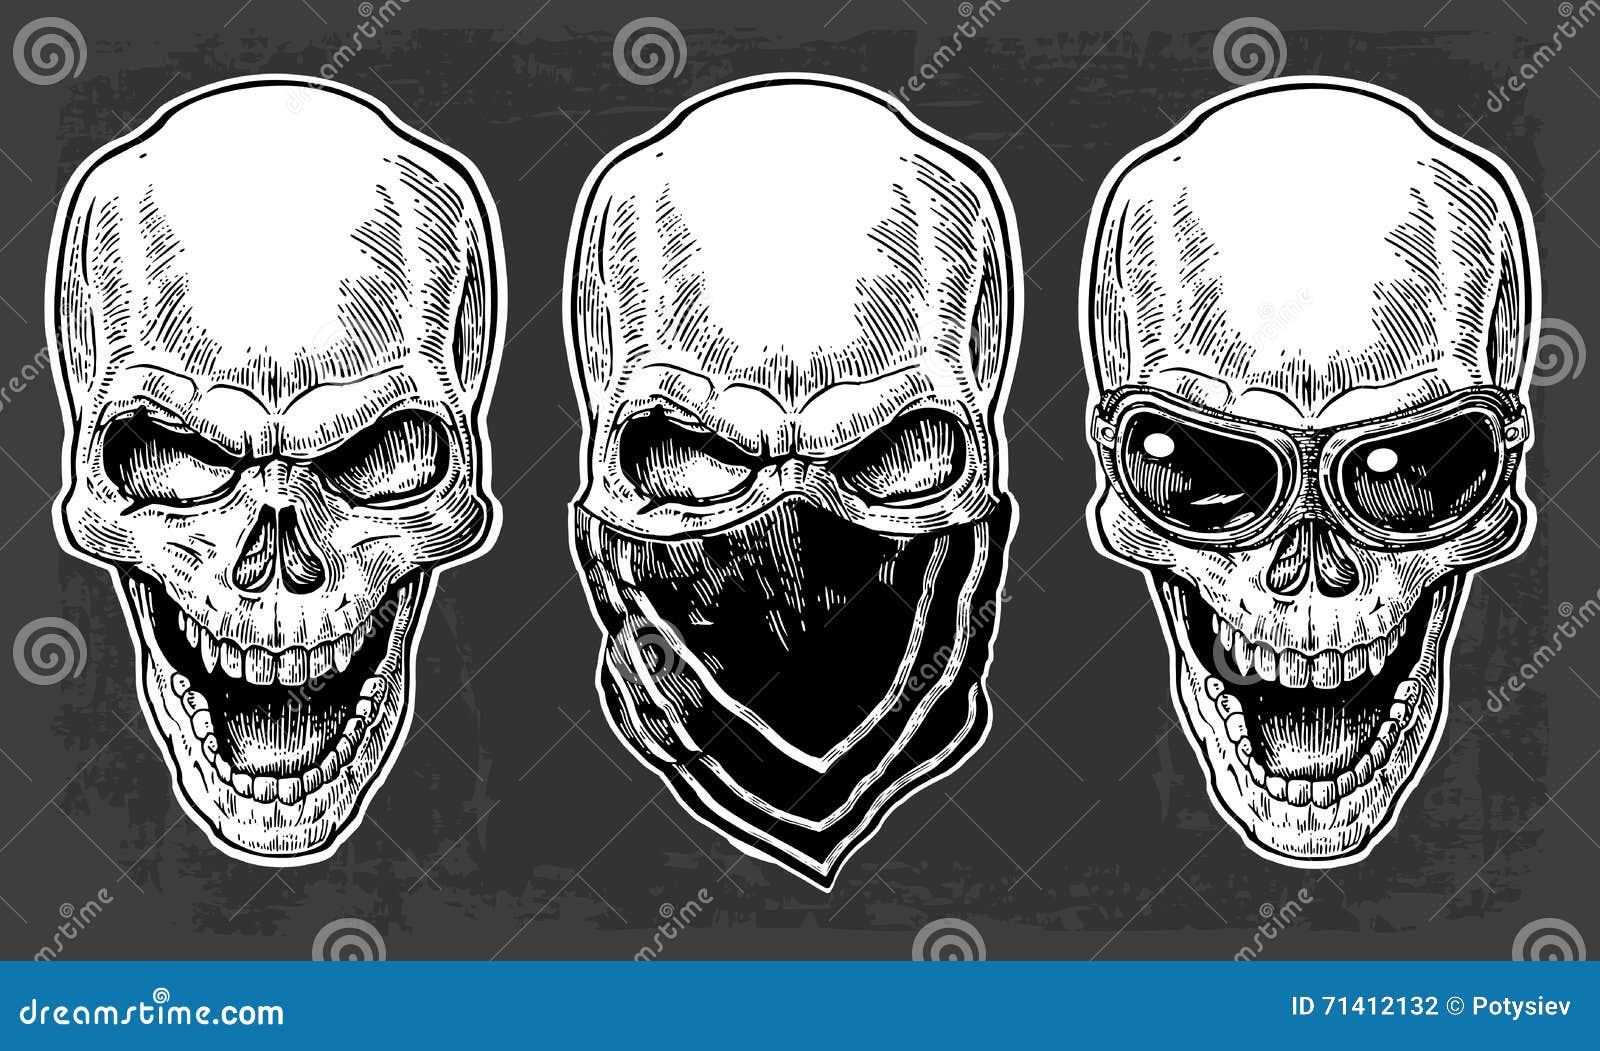 Skull with bandana black vintage vector illustration for poster and tattoo  biker club hand drawn design element isolated  CanStock